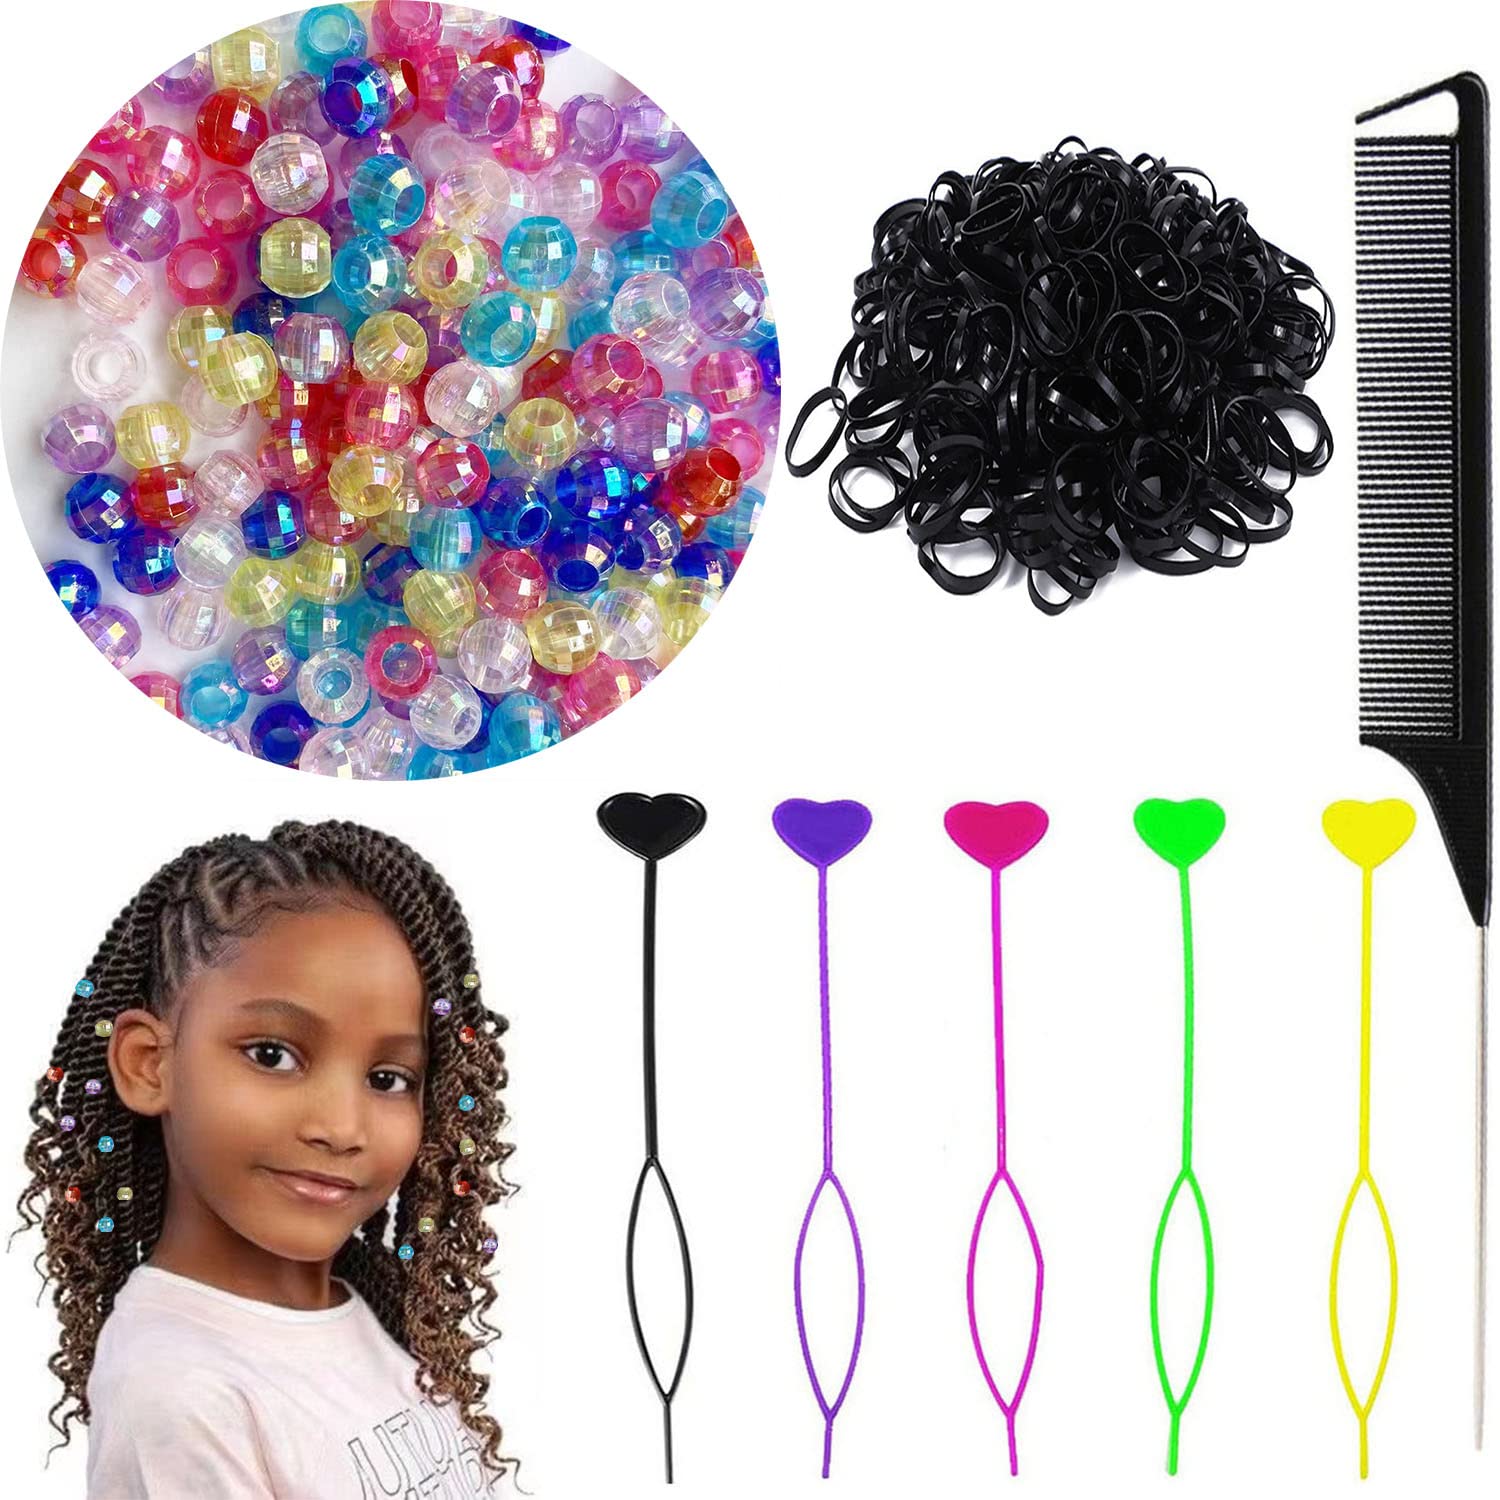  406pcs Hair Beads Set for Braids for Girls and Women Including  200pcs Clear Hair Beads for Braids for Kids,200pcs Elastic Rubber  Bands,5pcs Quick Beader for Hair Braids and 1Pc Rat